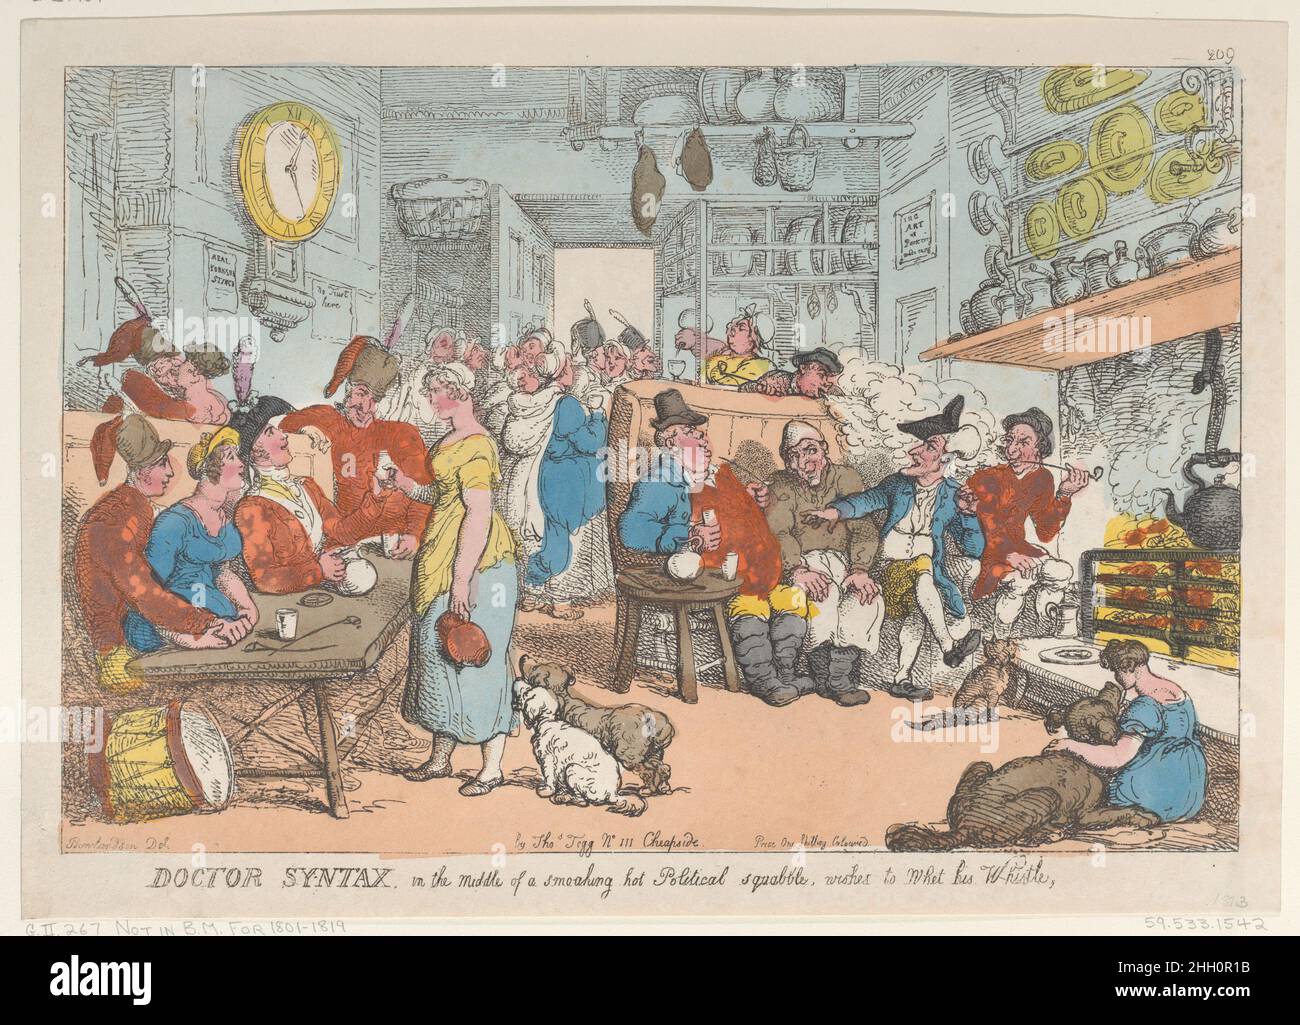 Doctor Syntax, in the Middle of a Smoking Hot Political Squabble, Wishes to Whet his Whistle August 31, 1813 Thomas Rowlandson Dr. Syntax, within a busy bar, seated at right, extends his hand to get a drink.. Doctor Syntax, in the Middle of a Smoking Hot Political Squabble, Wishes to Whet his Whistle. Thomas Rowlandson (British, London 1757–1827 London). August 31, 1813. Hand-colored etching. Thomas Tegg (British, 1776–1846). Prints Stock Photo